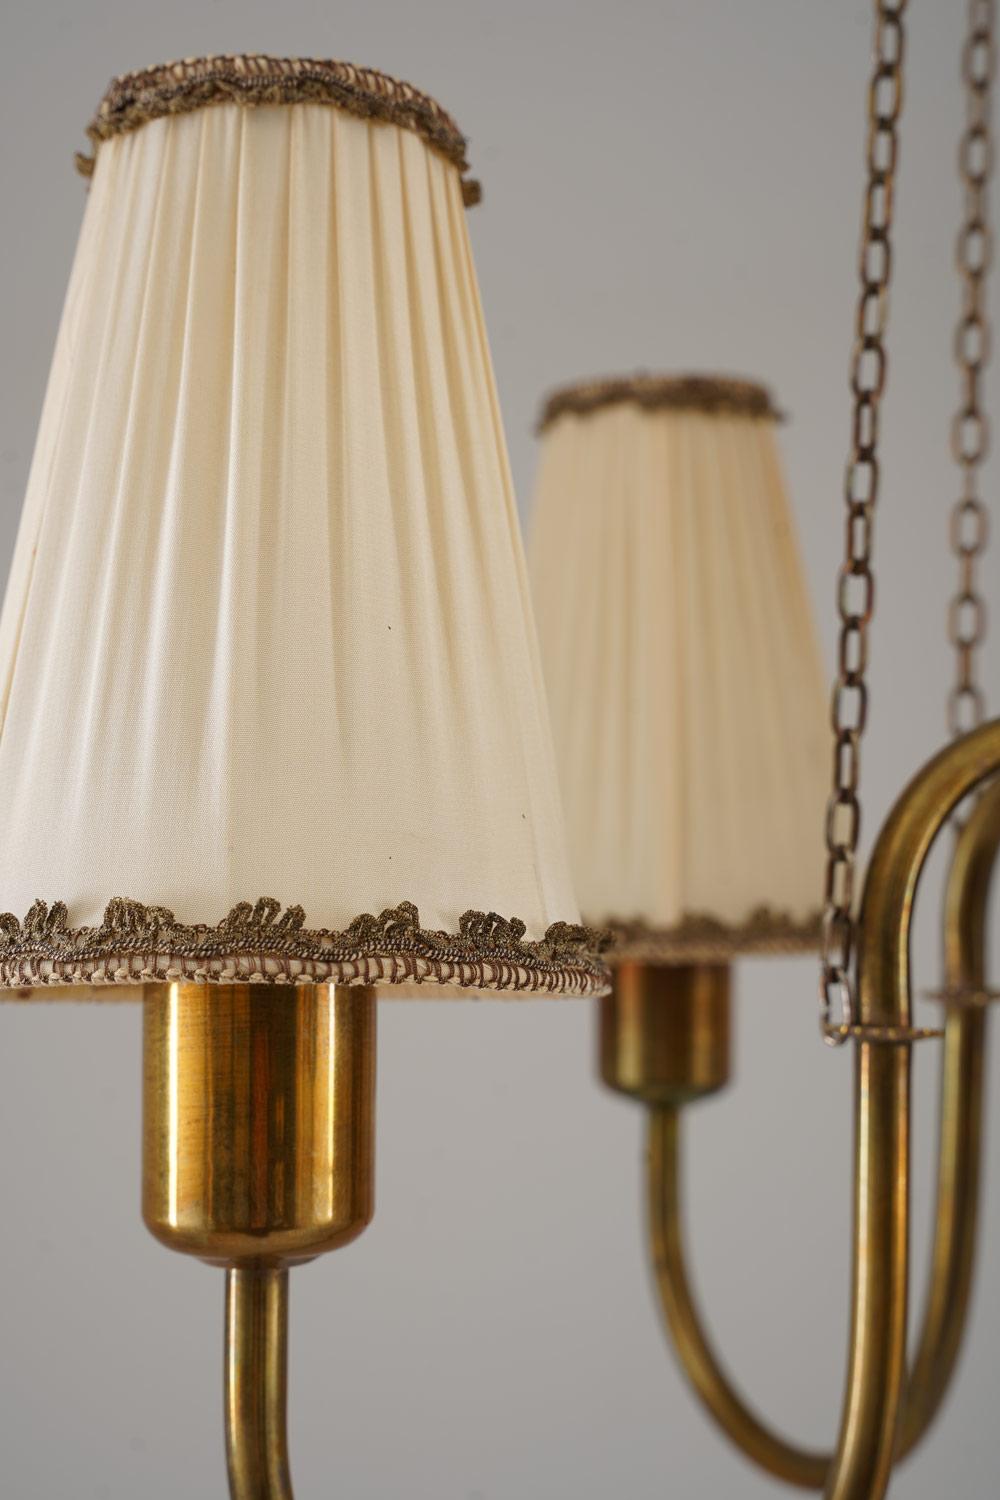 20th Century Swedish Modern Chandelier in Brass and Wood, 1940s For Sale